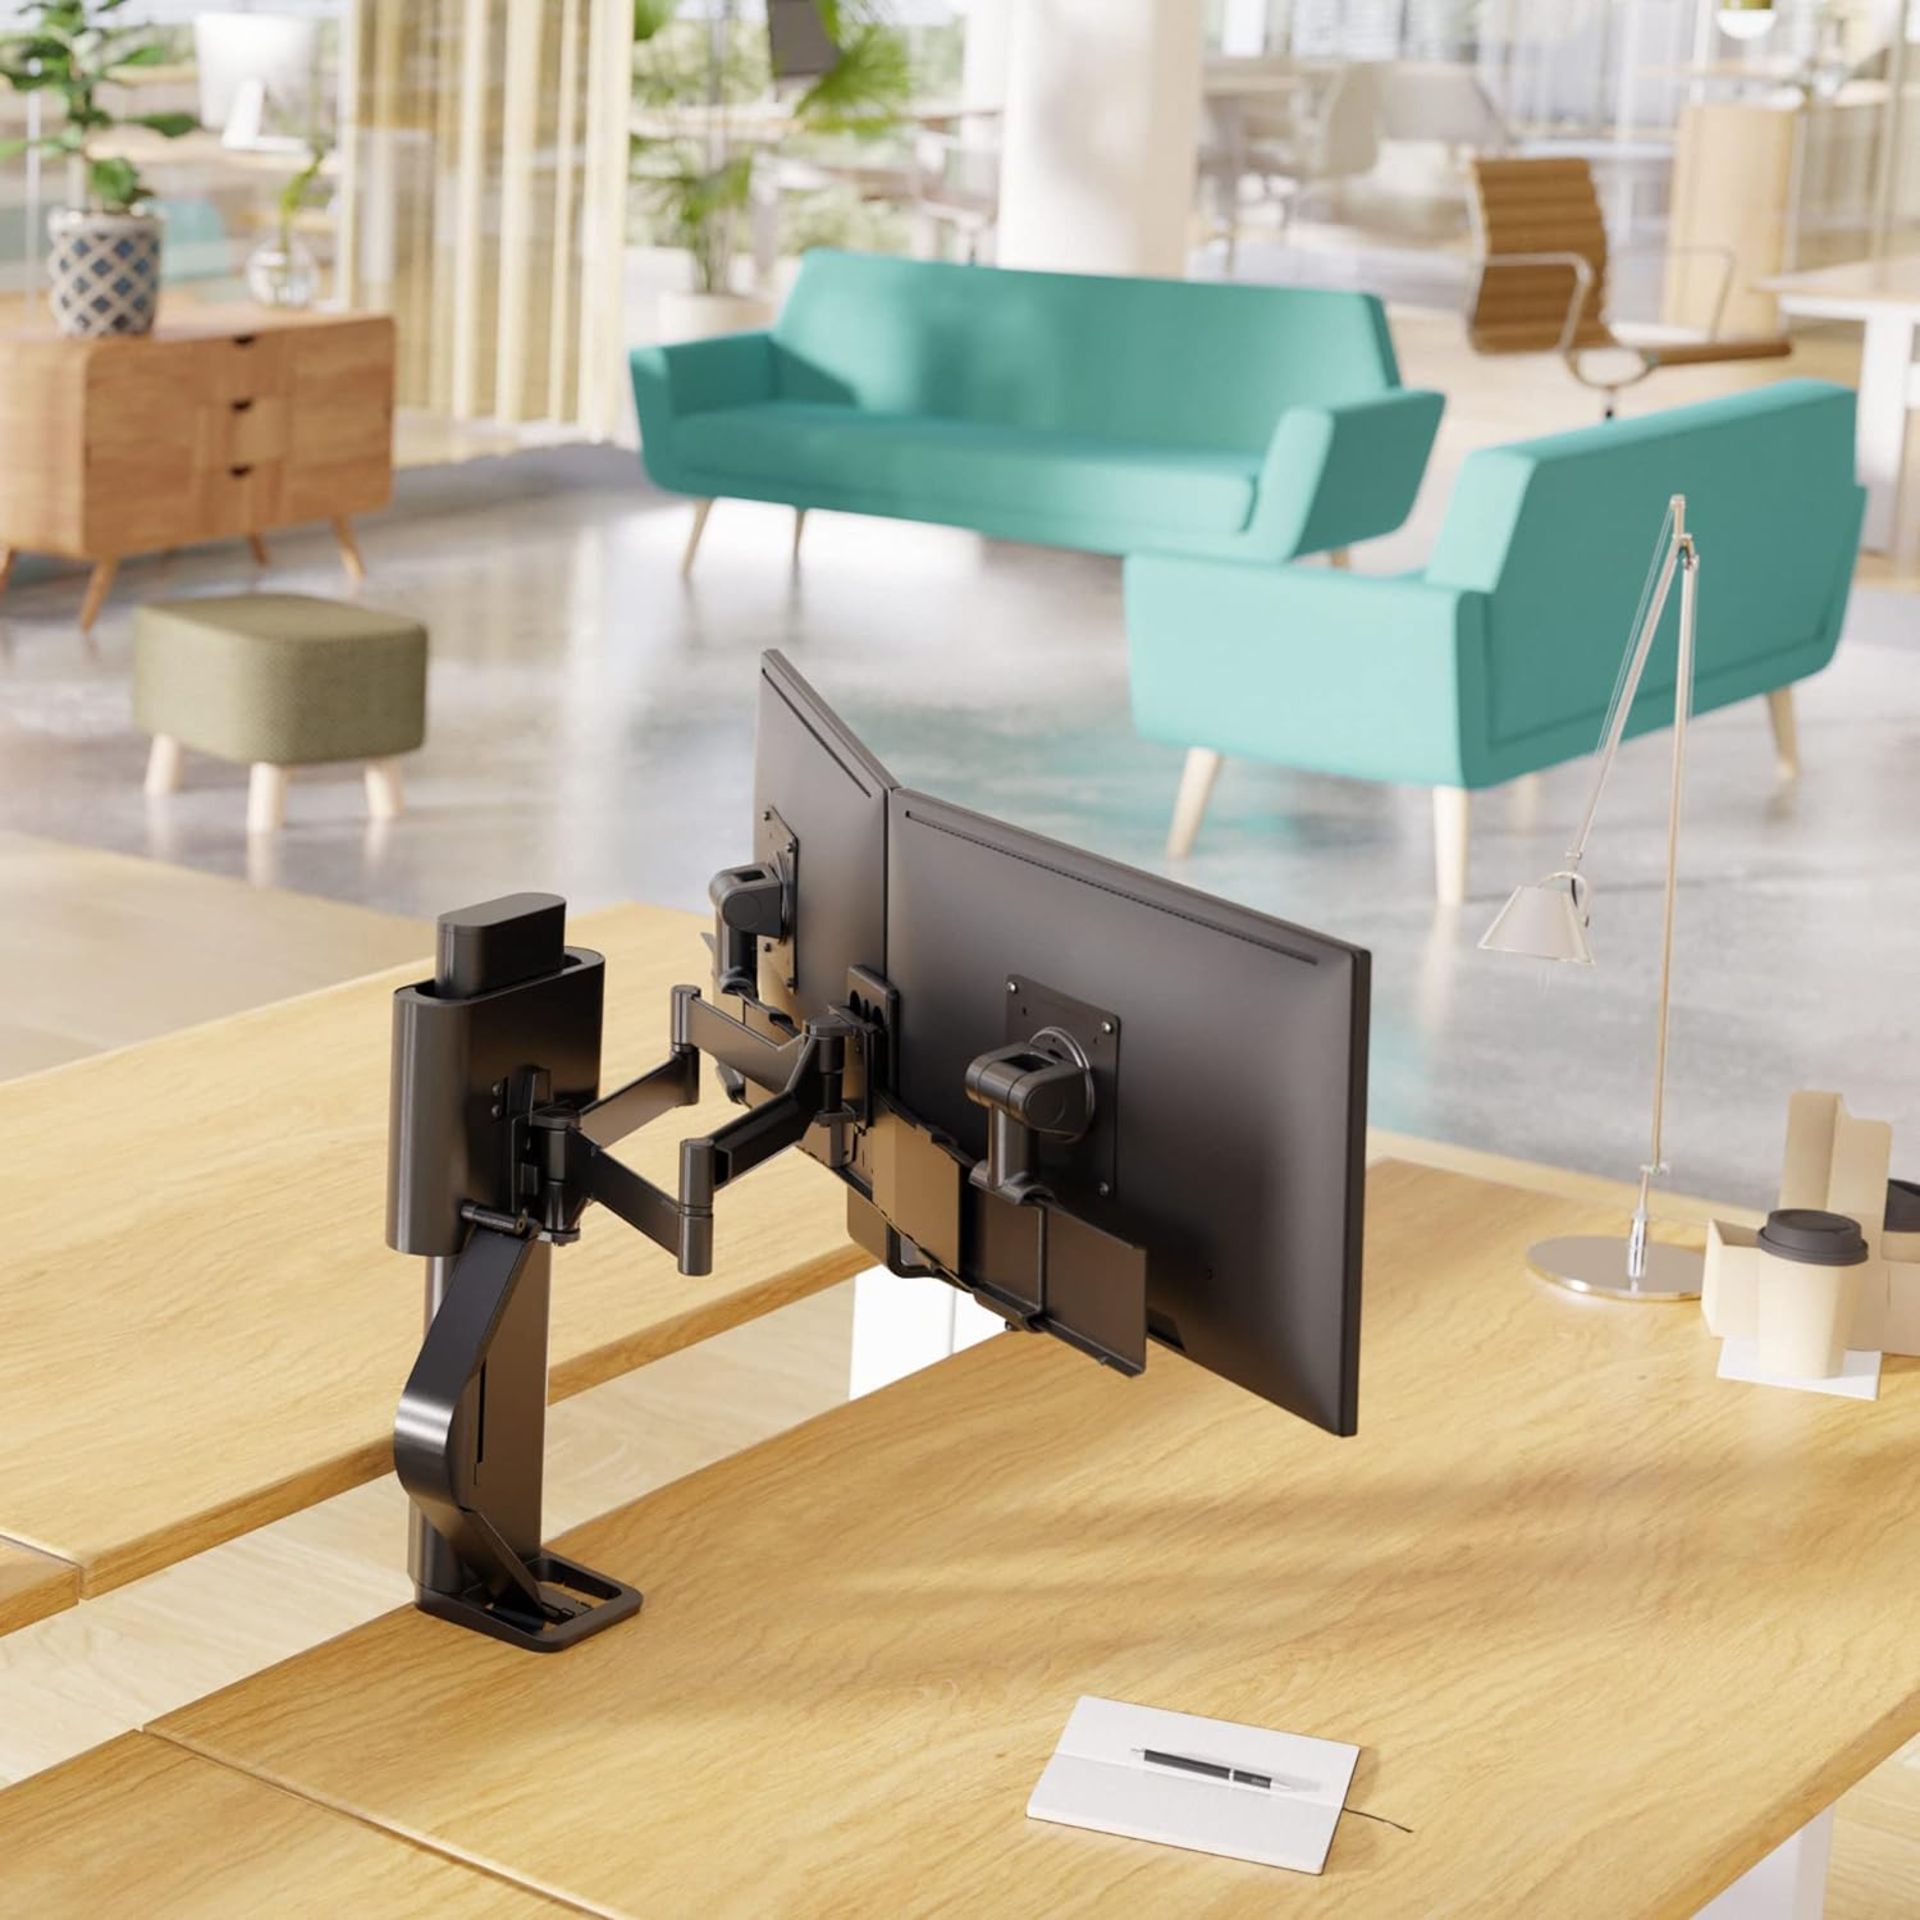 NEW & BOXED ERGOTRON Trace Dual Monitor Arm, VESA Desk Mount. RRP £417. for 2 Monitors Up to 27 - Image 4 of 8